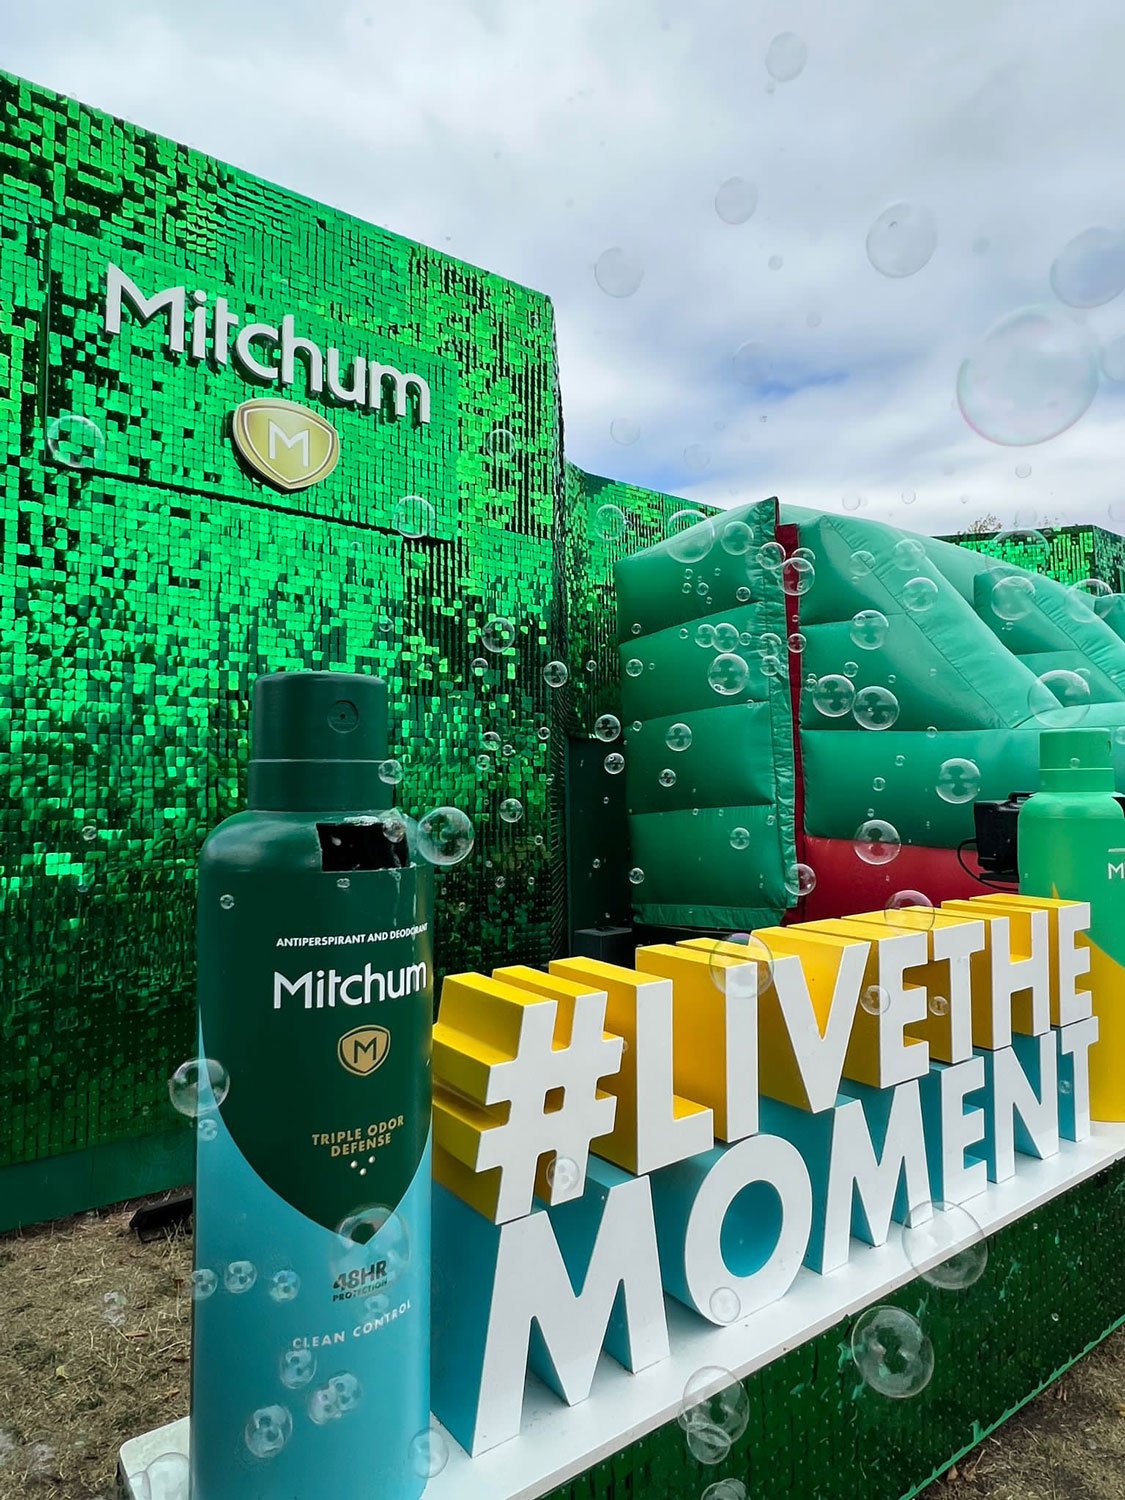 Mitchum - Live the moment - Pop Up Shop Agency